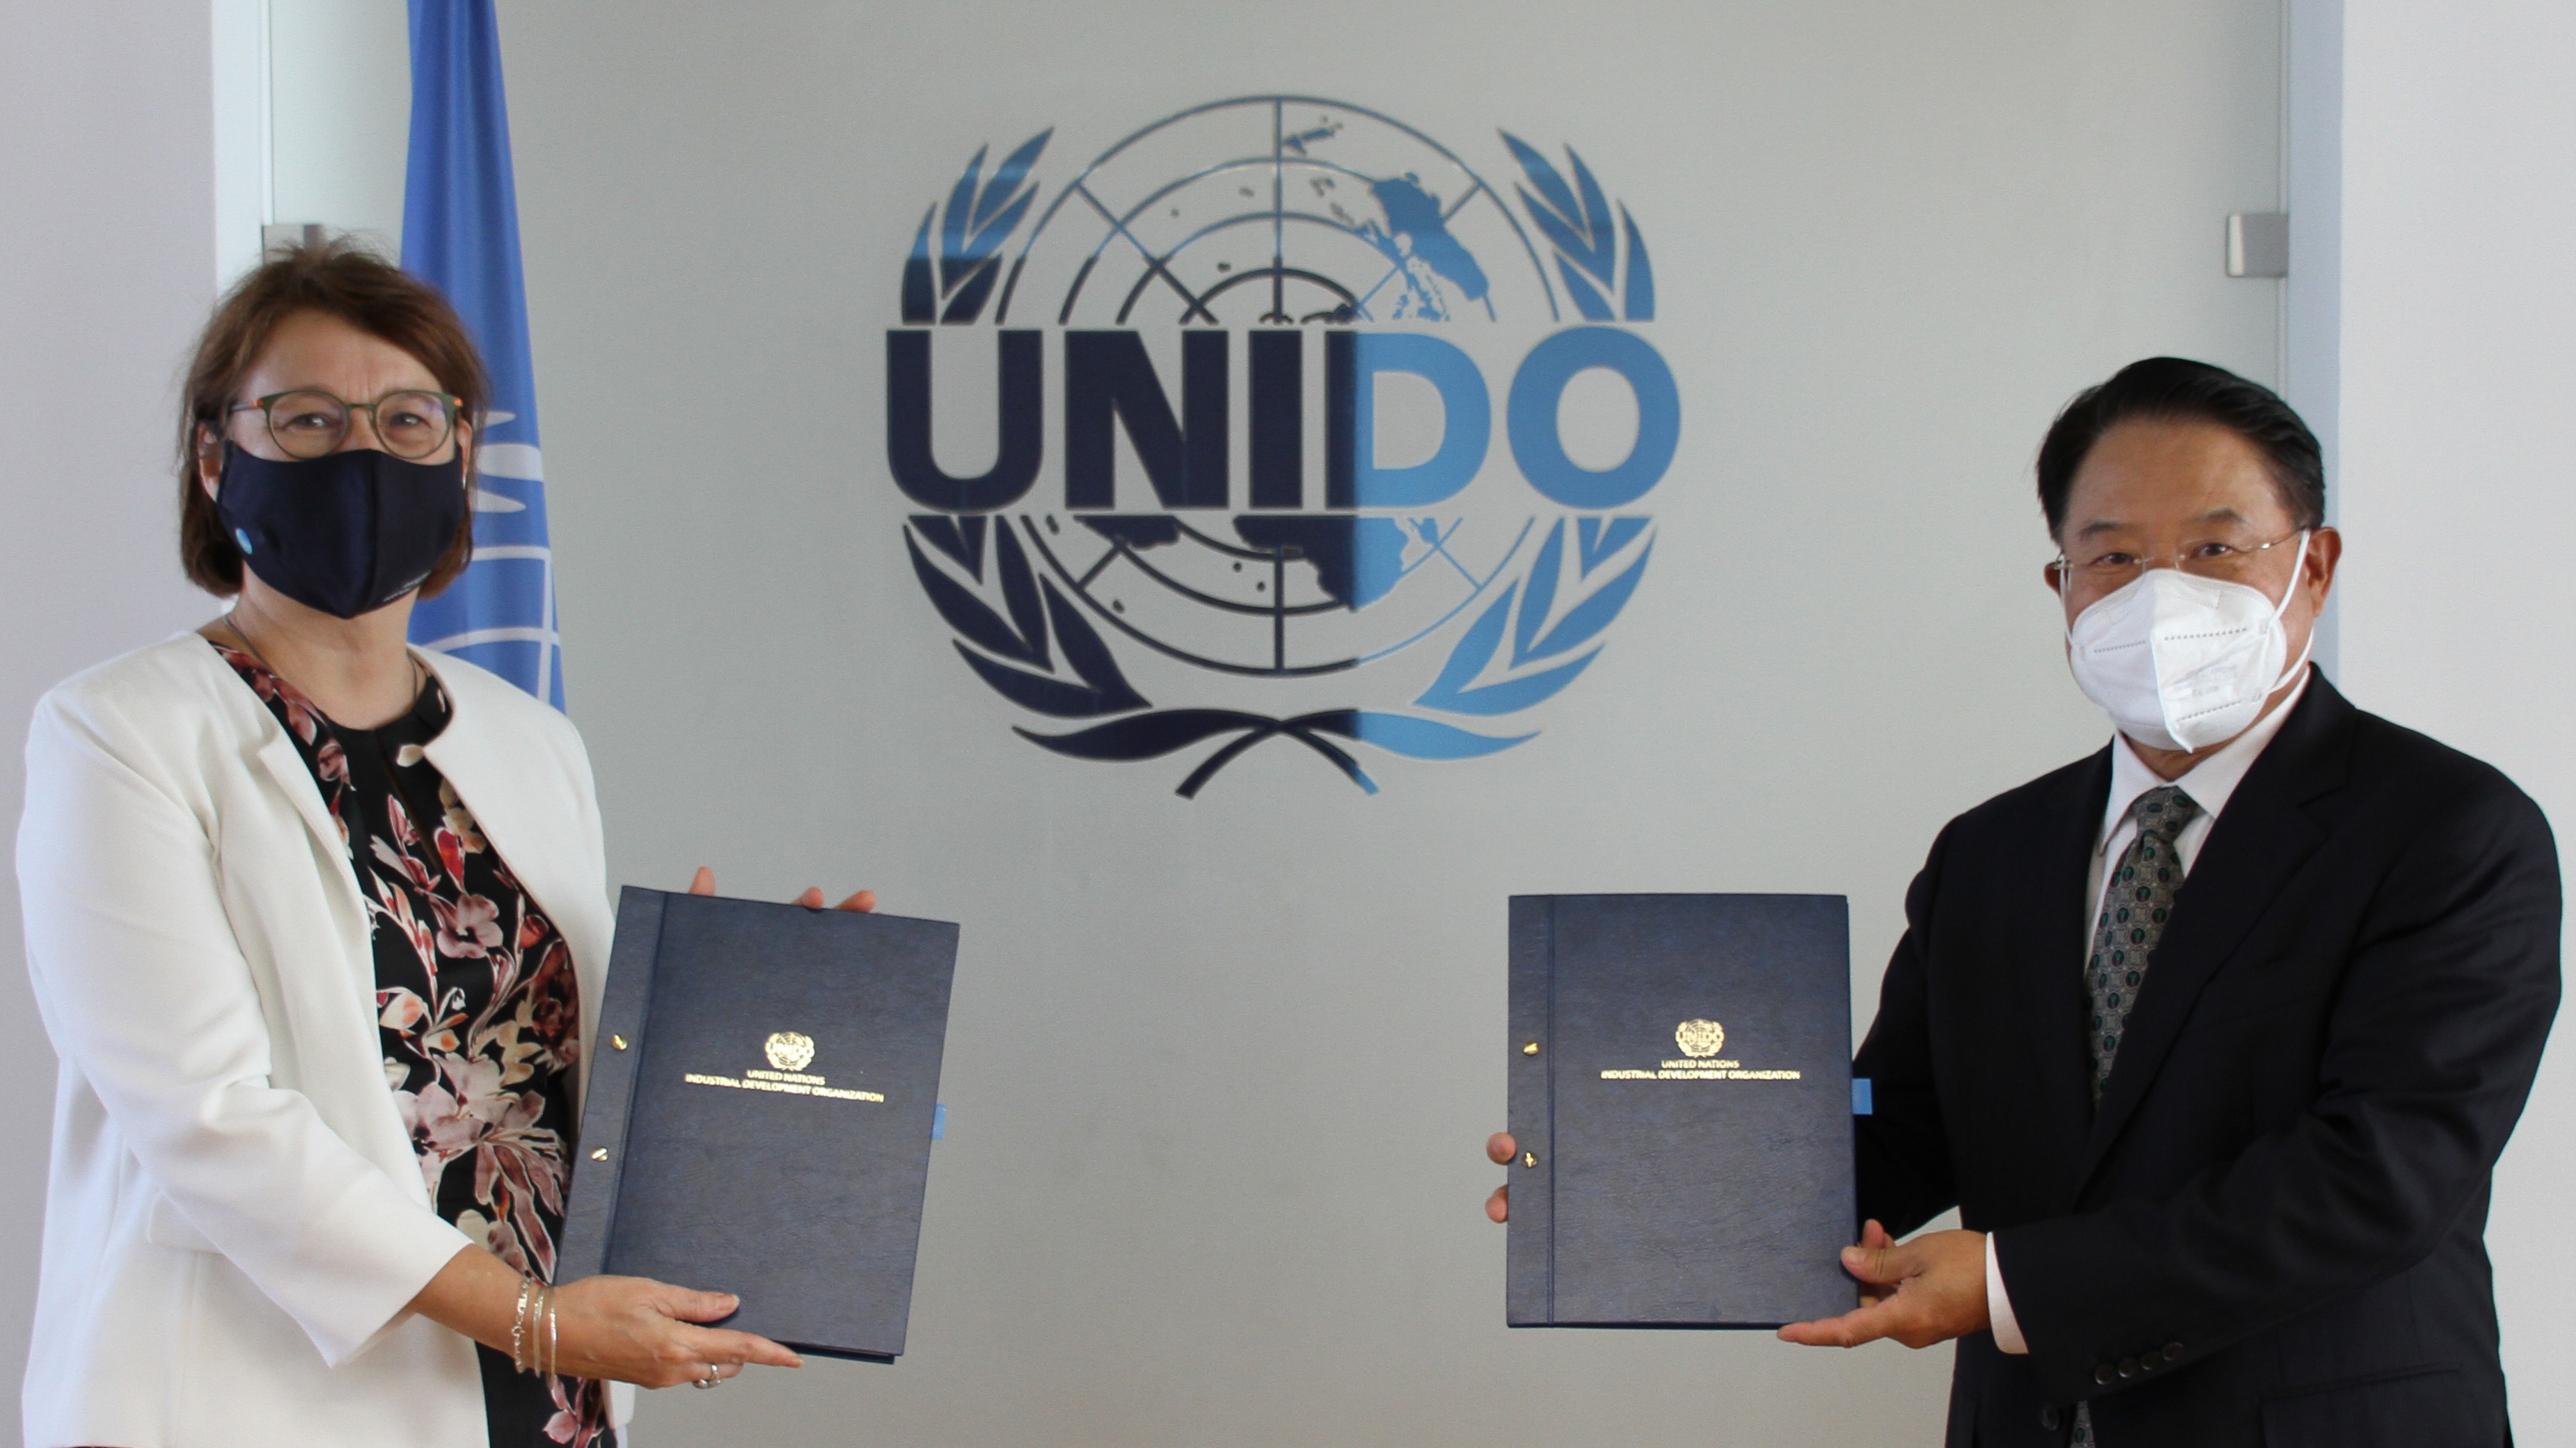 UNIDO, Finland agree to strengthen cooperation on developing the natural resources sector and the circular economy in developing countries